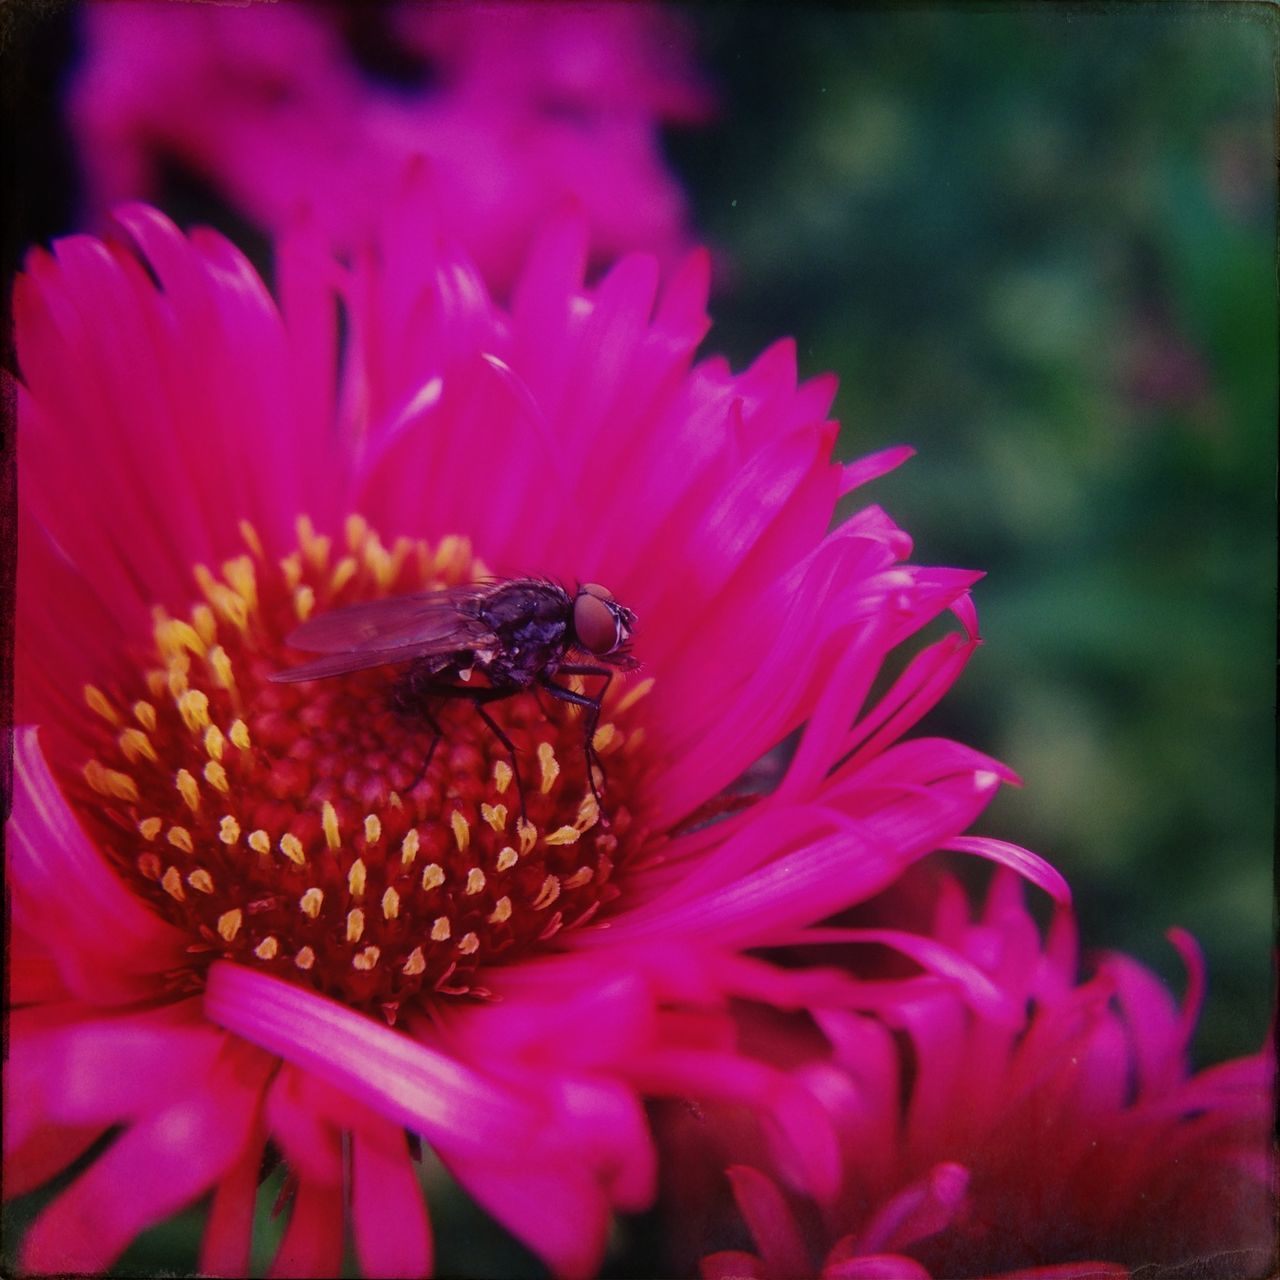 flower, animal themes, one animal, animals in the wild, petal, insect, wildlife, flower head, freshness, fragility, beauty in nature, close-up, pollination, nature, focus on foreground, pink color, growth, pollen, bee, blooming